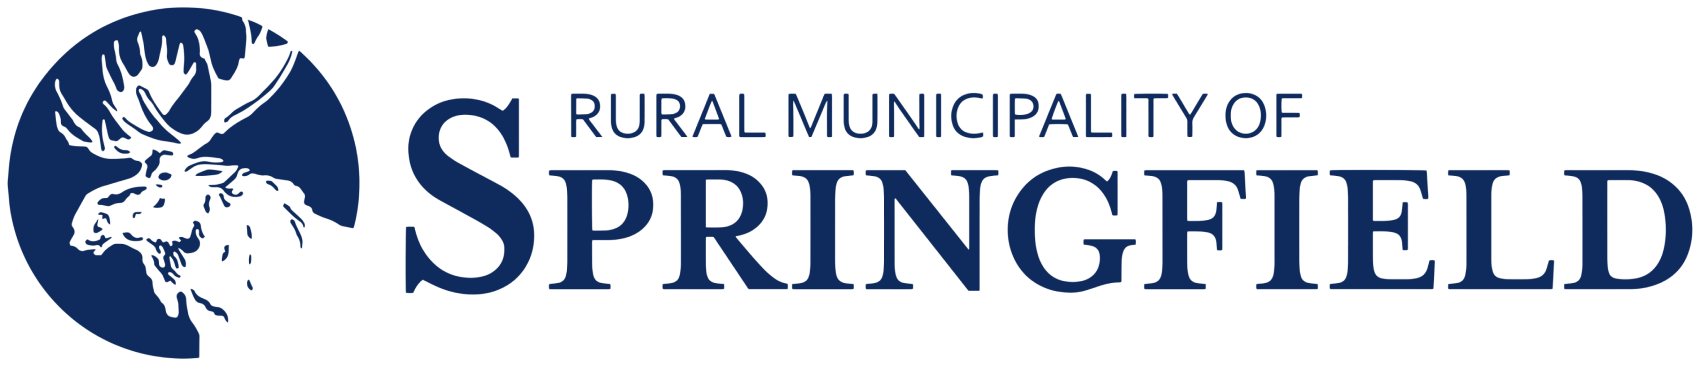 Full logo for Rural Municipality of Springfield